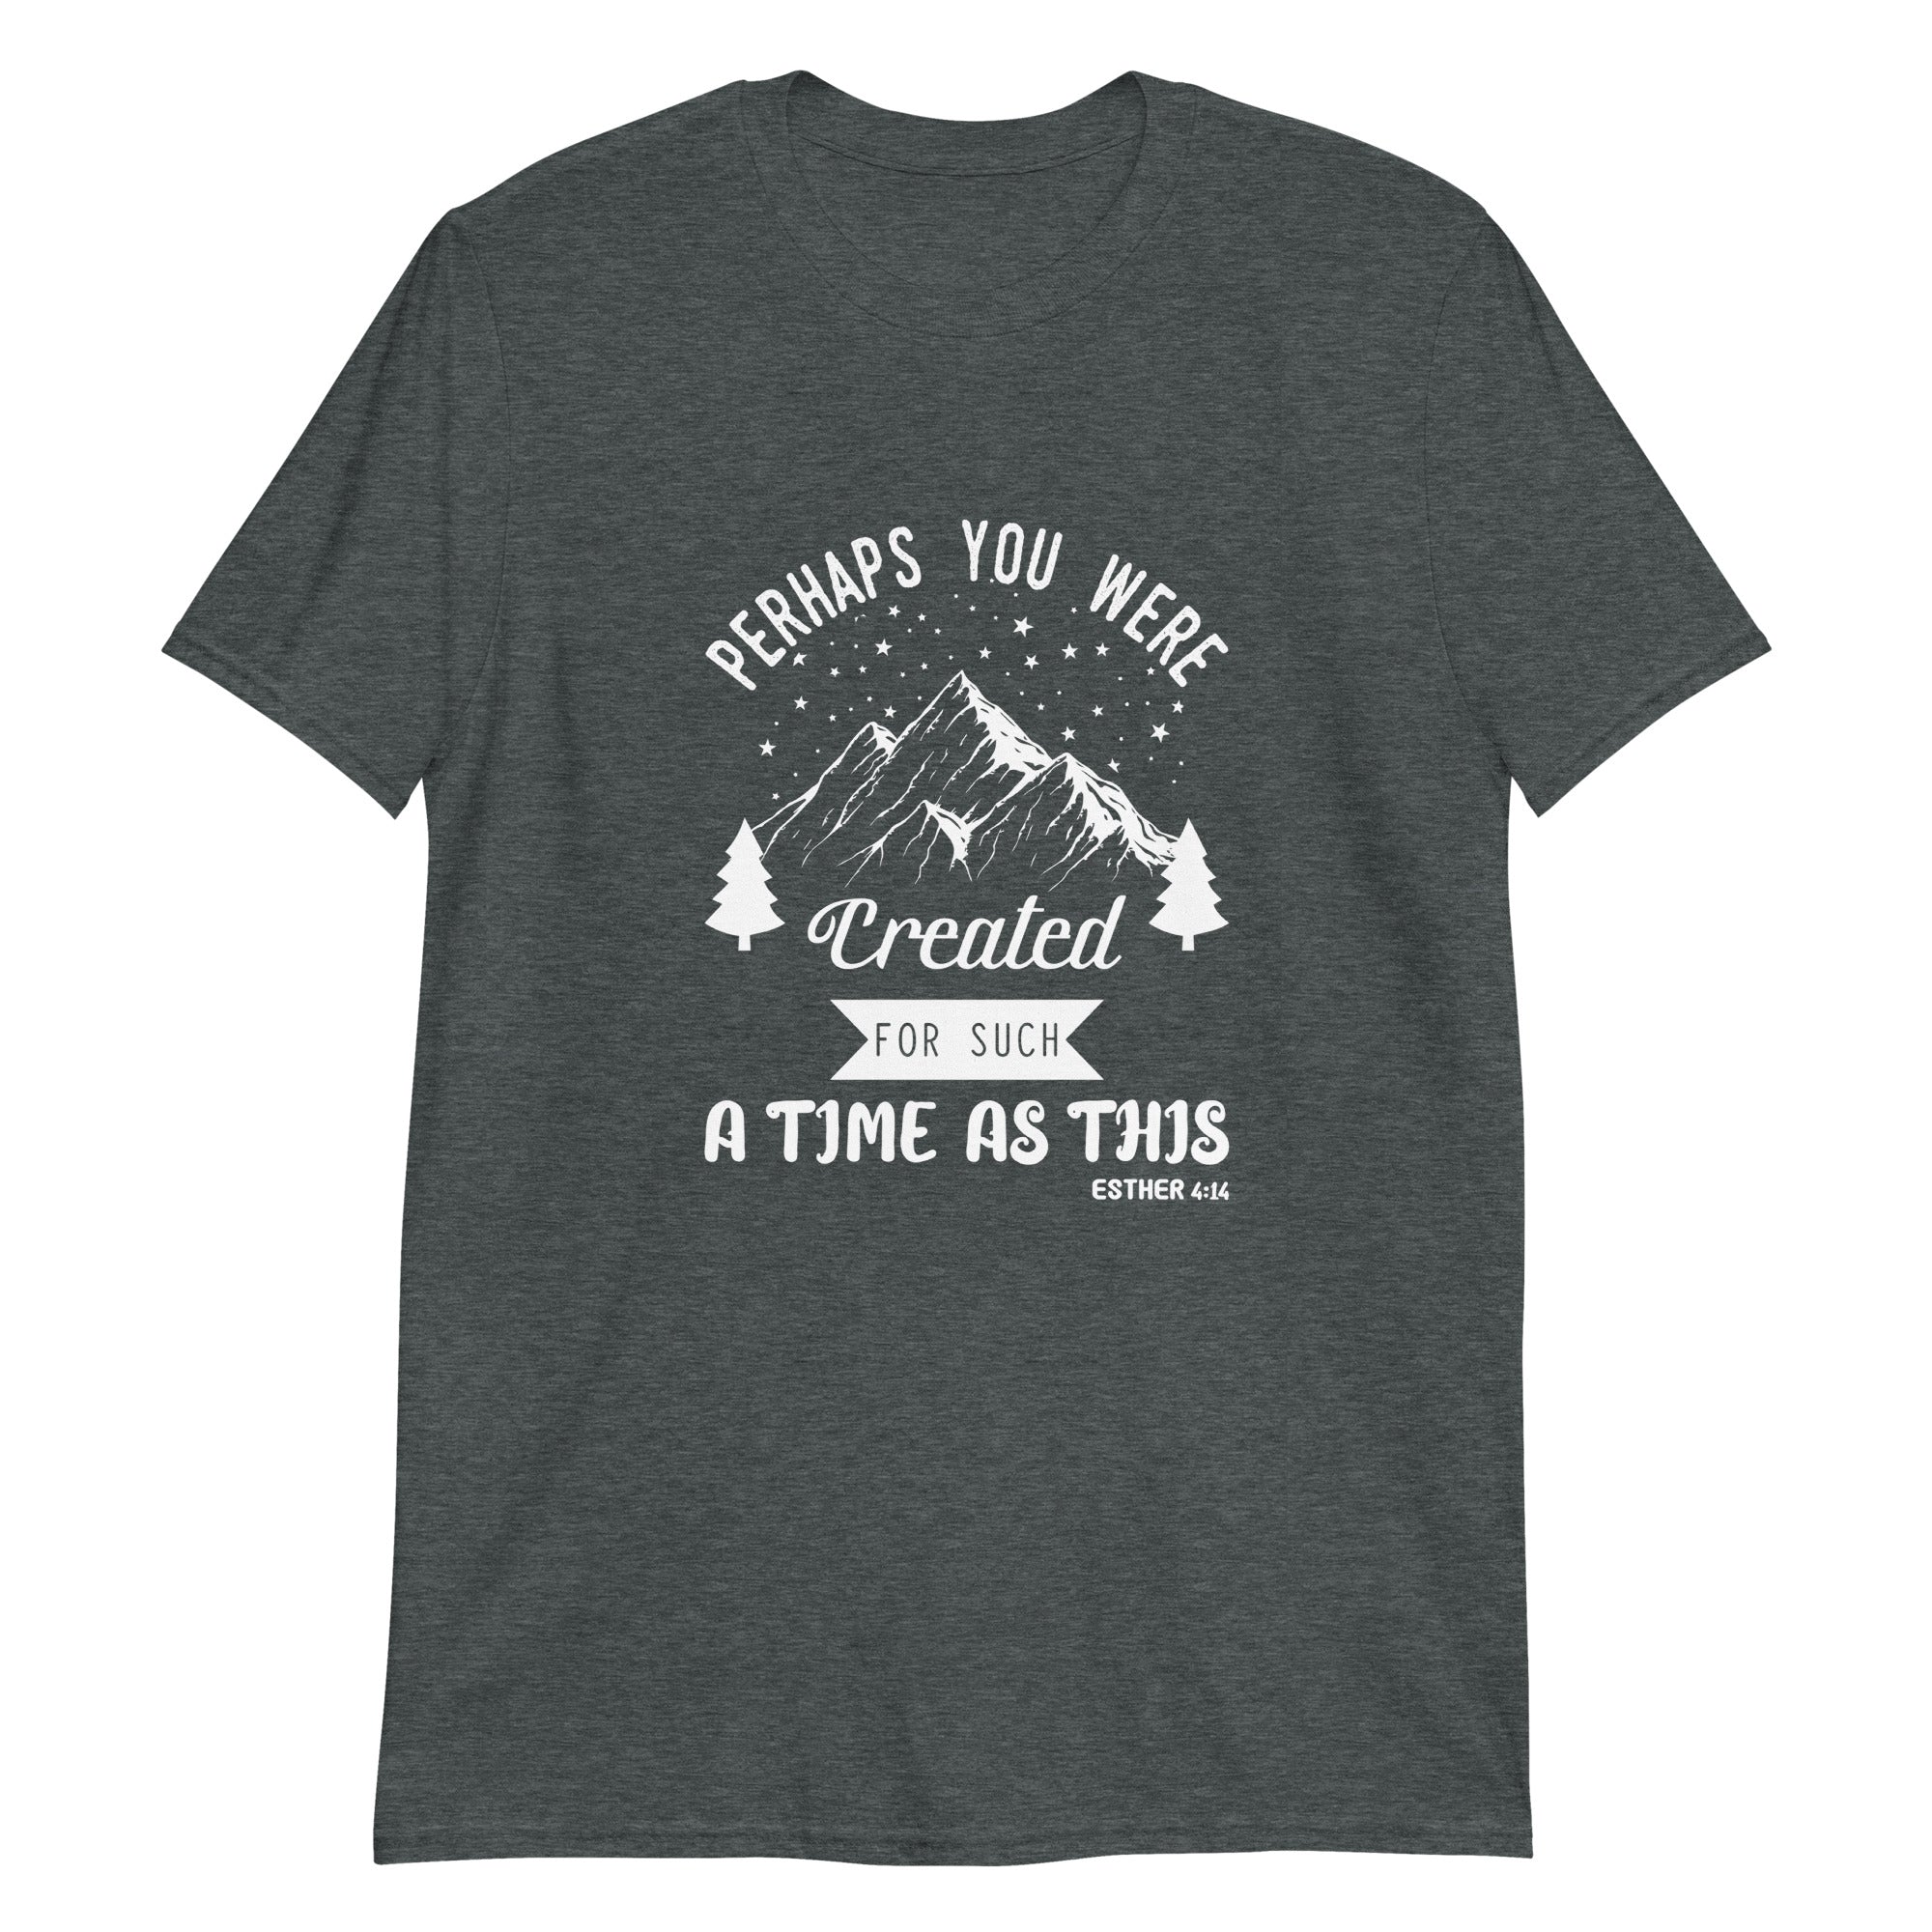 Maybe You Were Made for a Time Such as This Christian Short-Sleeve Unisex T-Shirt